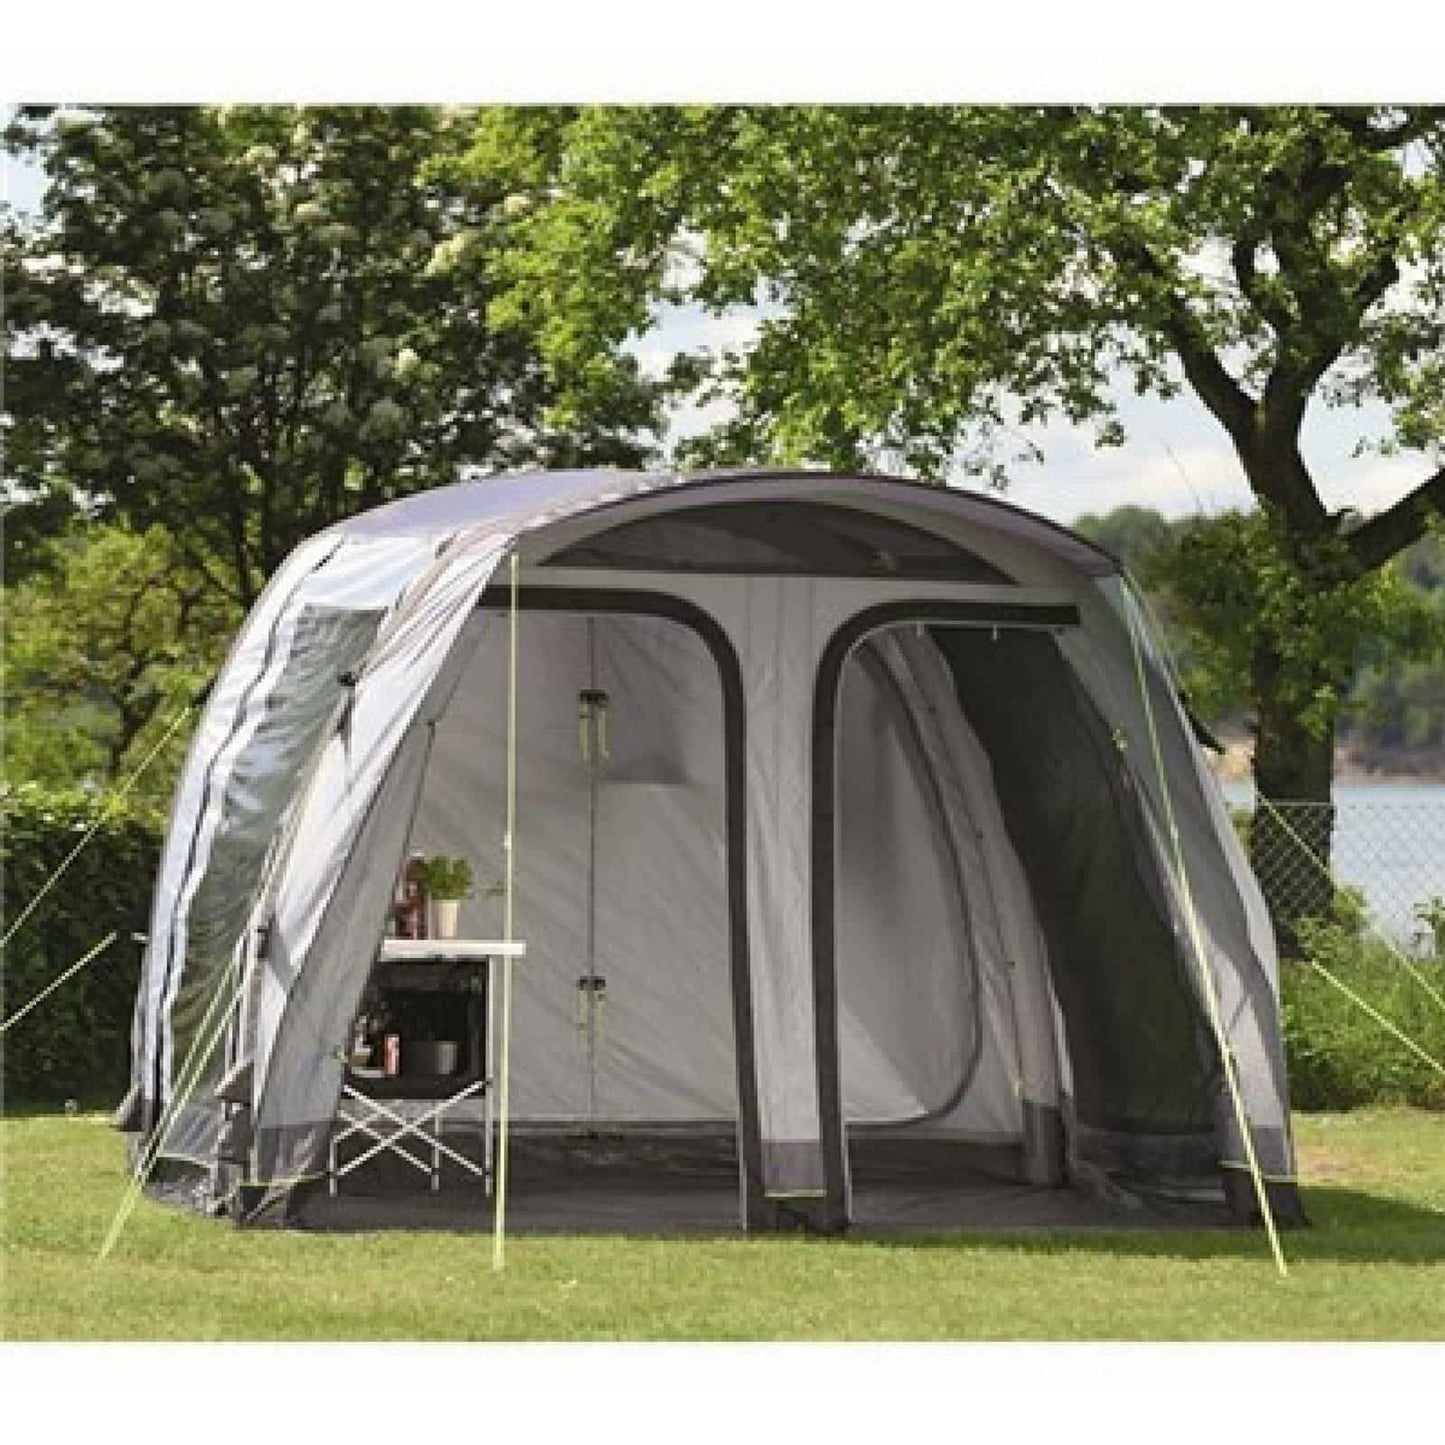 Outwell Atlantic Road Smart Air Driveaway Awning (2018 Edition) - Quality Caravan Awnings